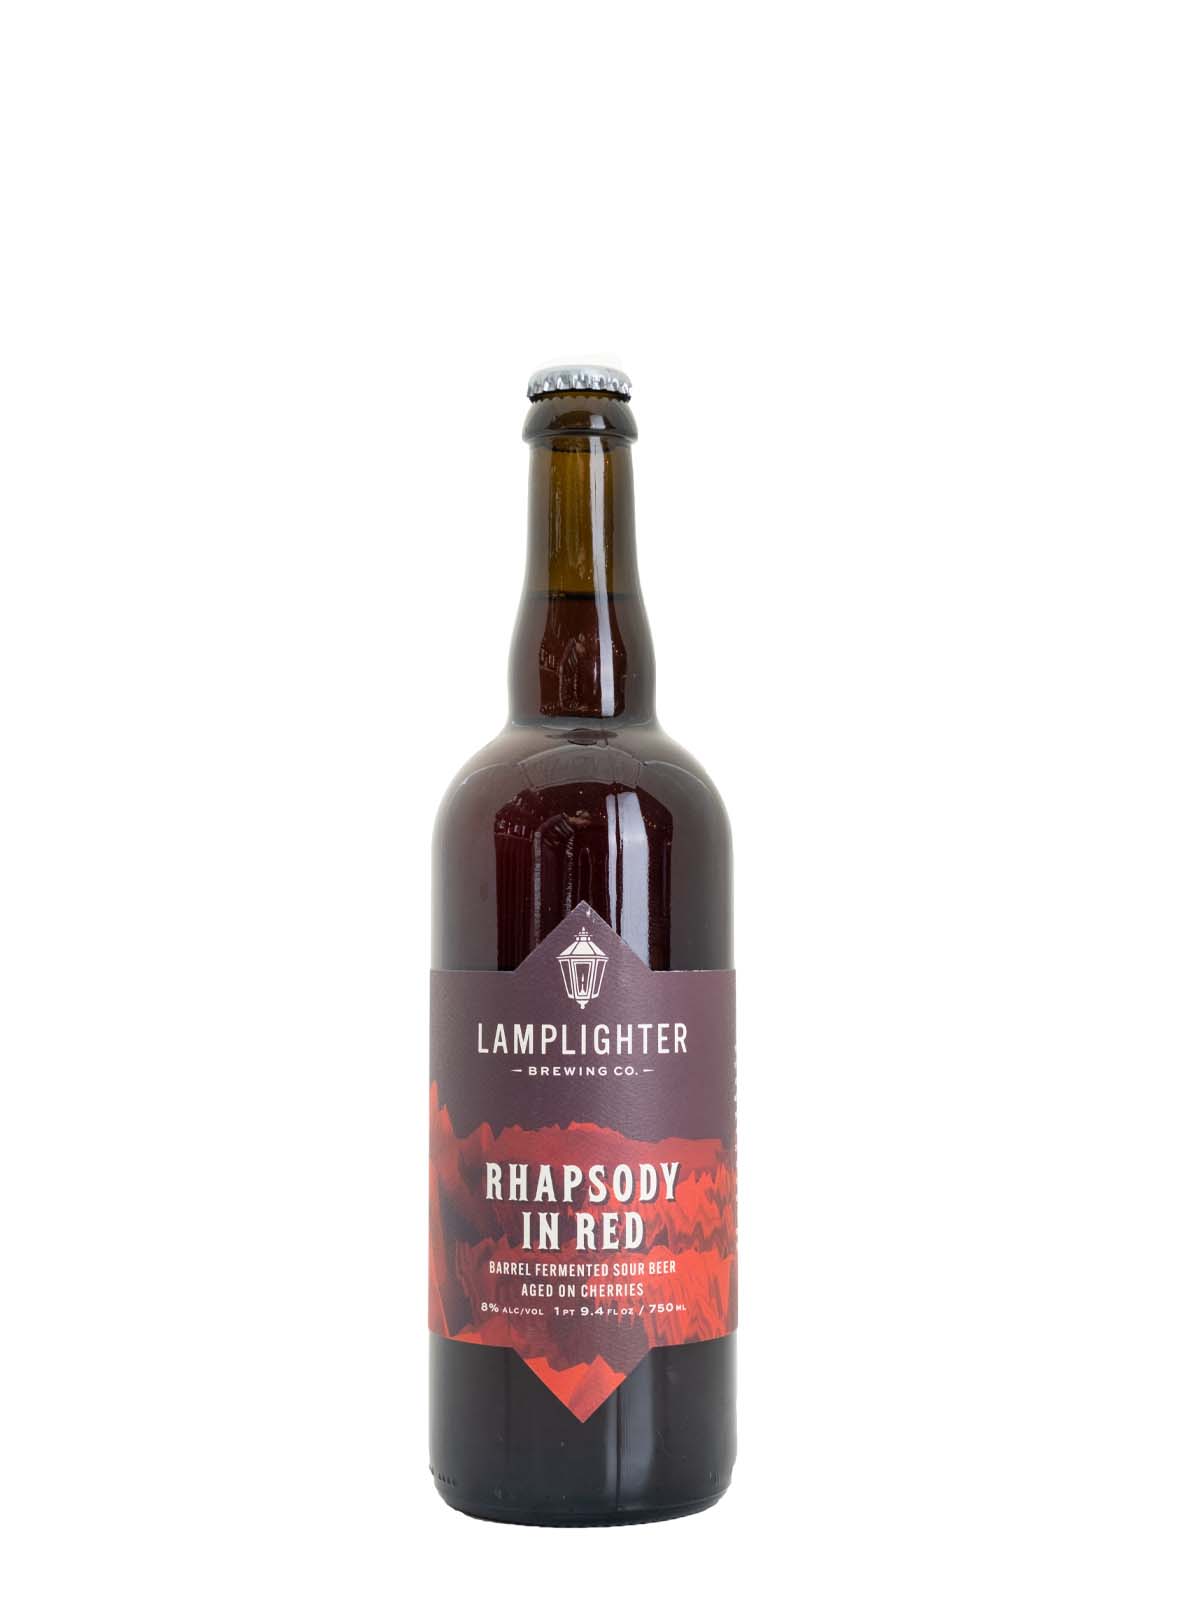 Lamplighter Brewing Co "Rhapsody in Red" Mixed Culture Sour Aged on Cherries 750ml (Cambridge, MA)